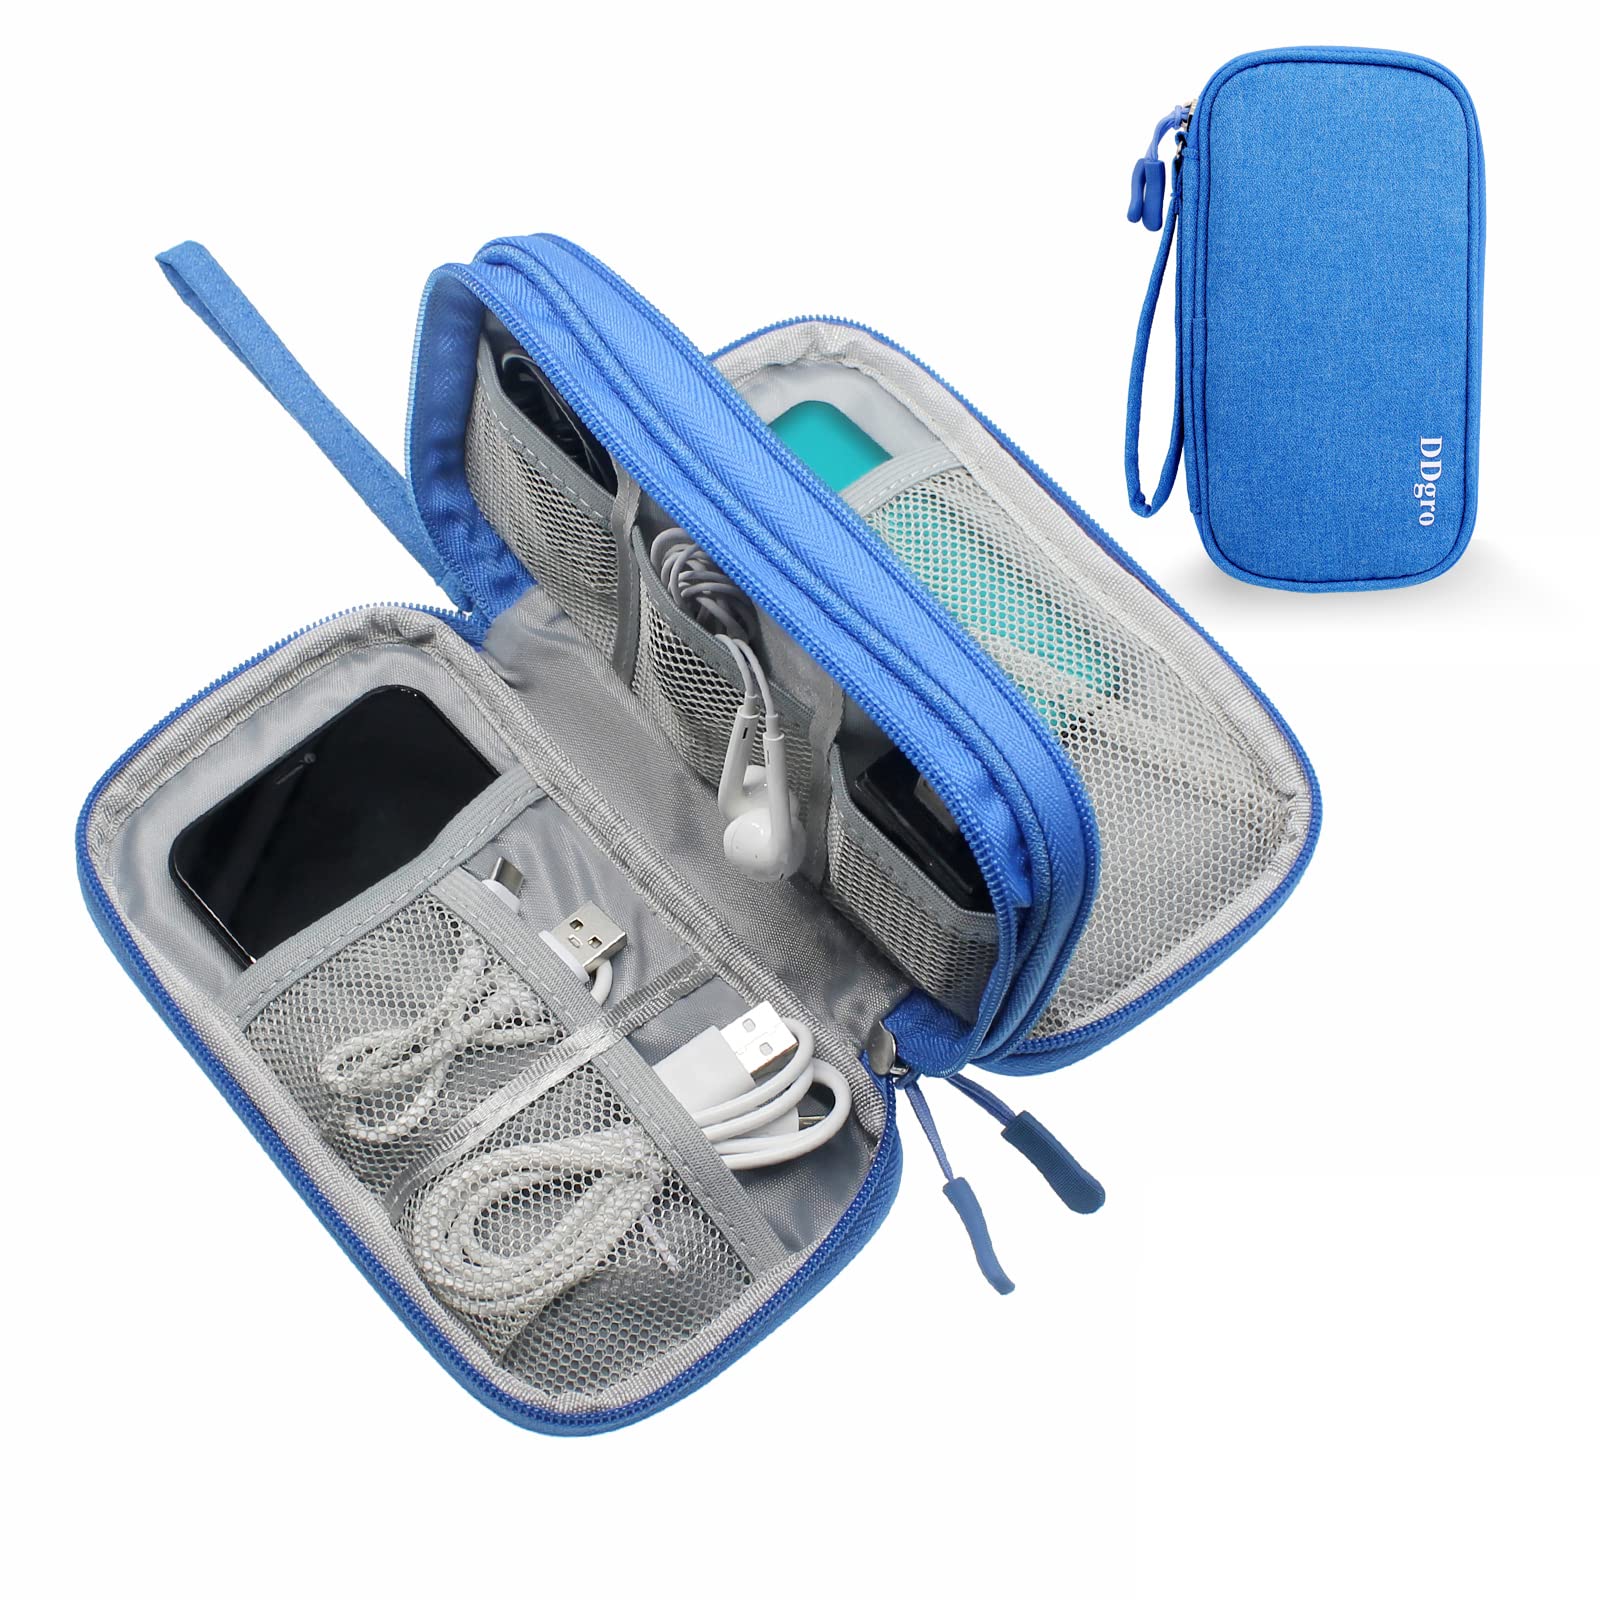 DDgro Electronics Travel Organizer, Small Accessories Pouch Bag for Keeping Power Cord/Charger/Cables Organized (Small, Azure Blue)